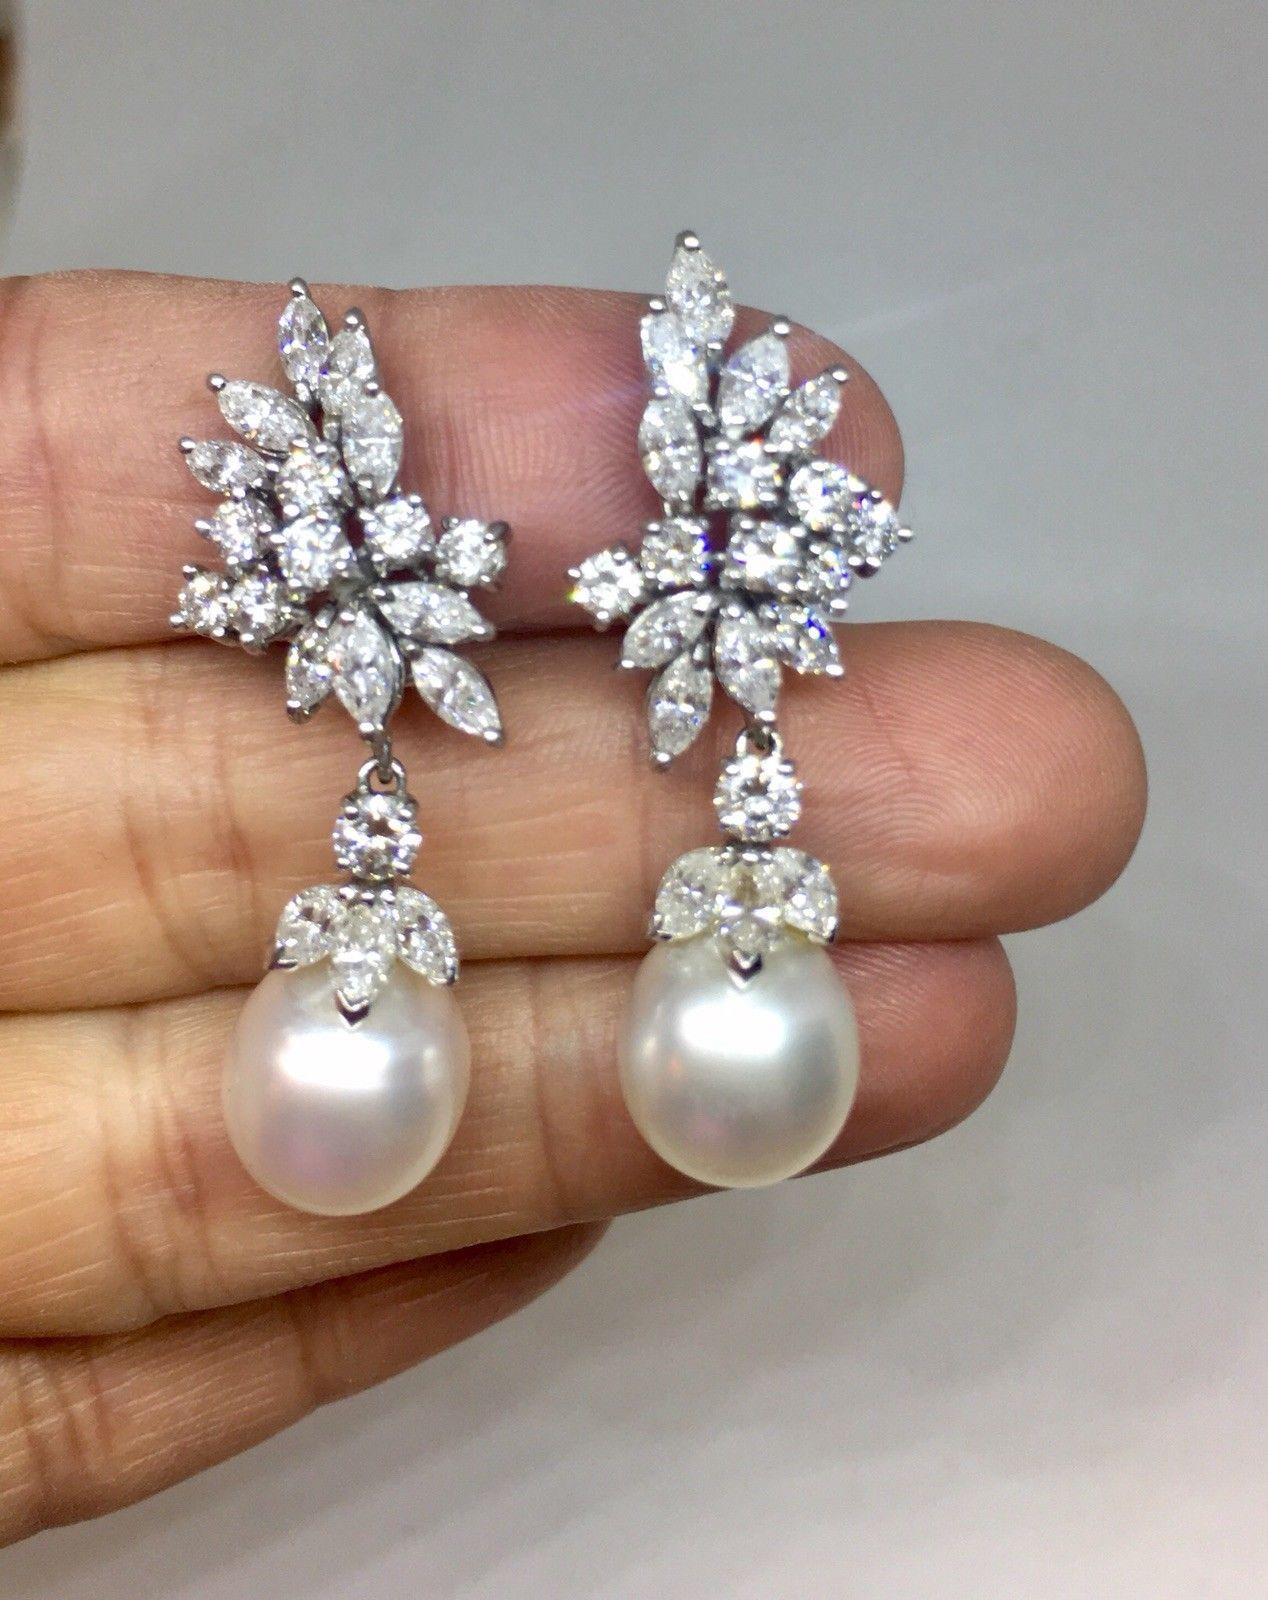 Stunning Estate Pair Platinum 5.60ct VS Diamond South Sea Cultured Pearl Pendant Earrings

Absolutely gorgeous high quality diamond and pearl earrings feature 16 round and 24 marquise-shaped diamonds totaling approximately 5.60 carats,

2 oval